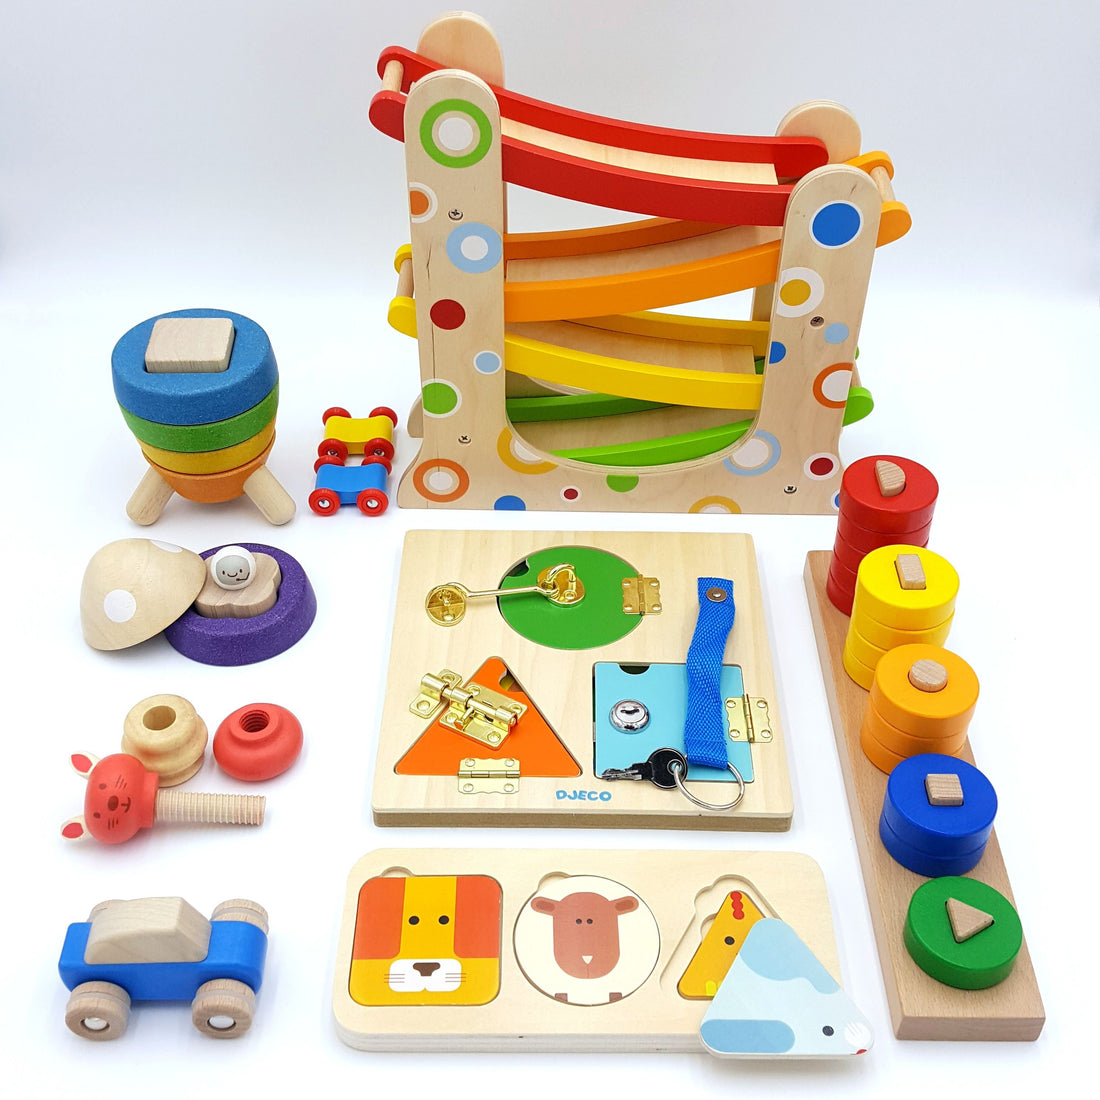 Wooden Toy Rentals: Marching Against the Status Quo with Sustainable Play